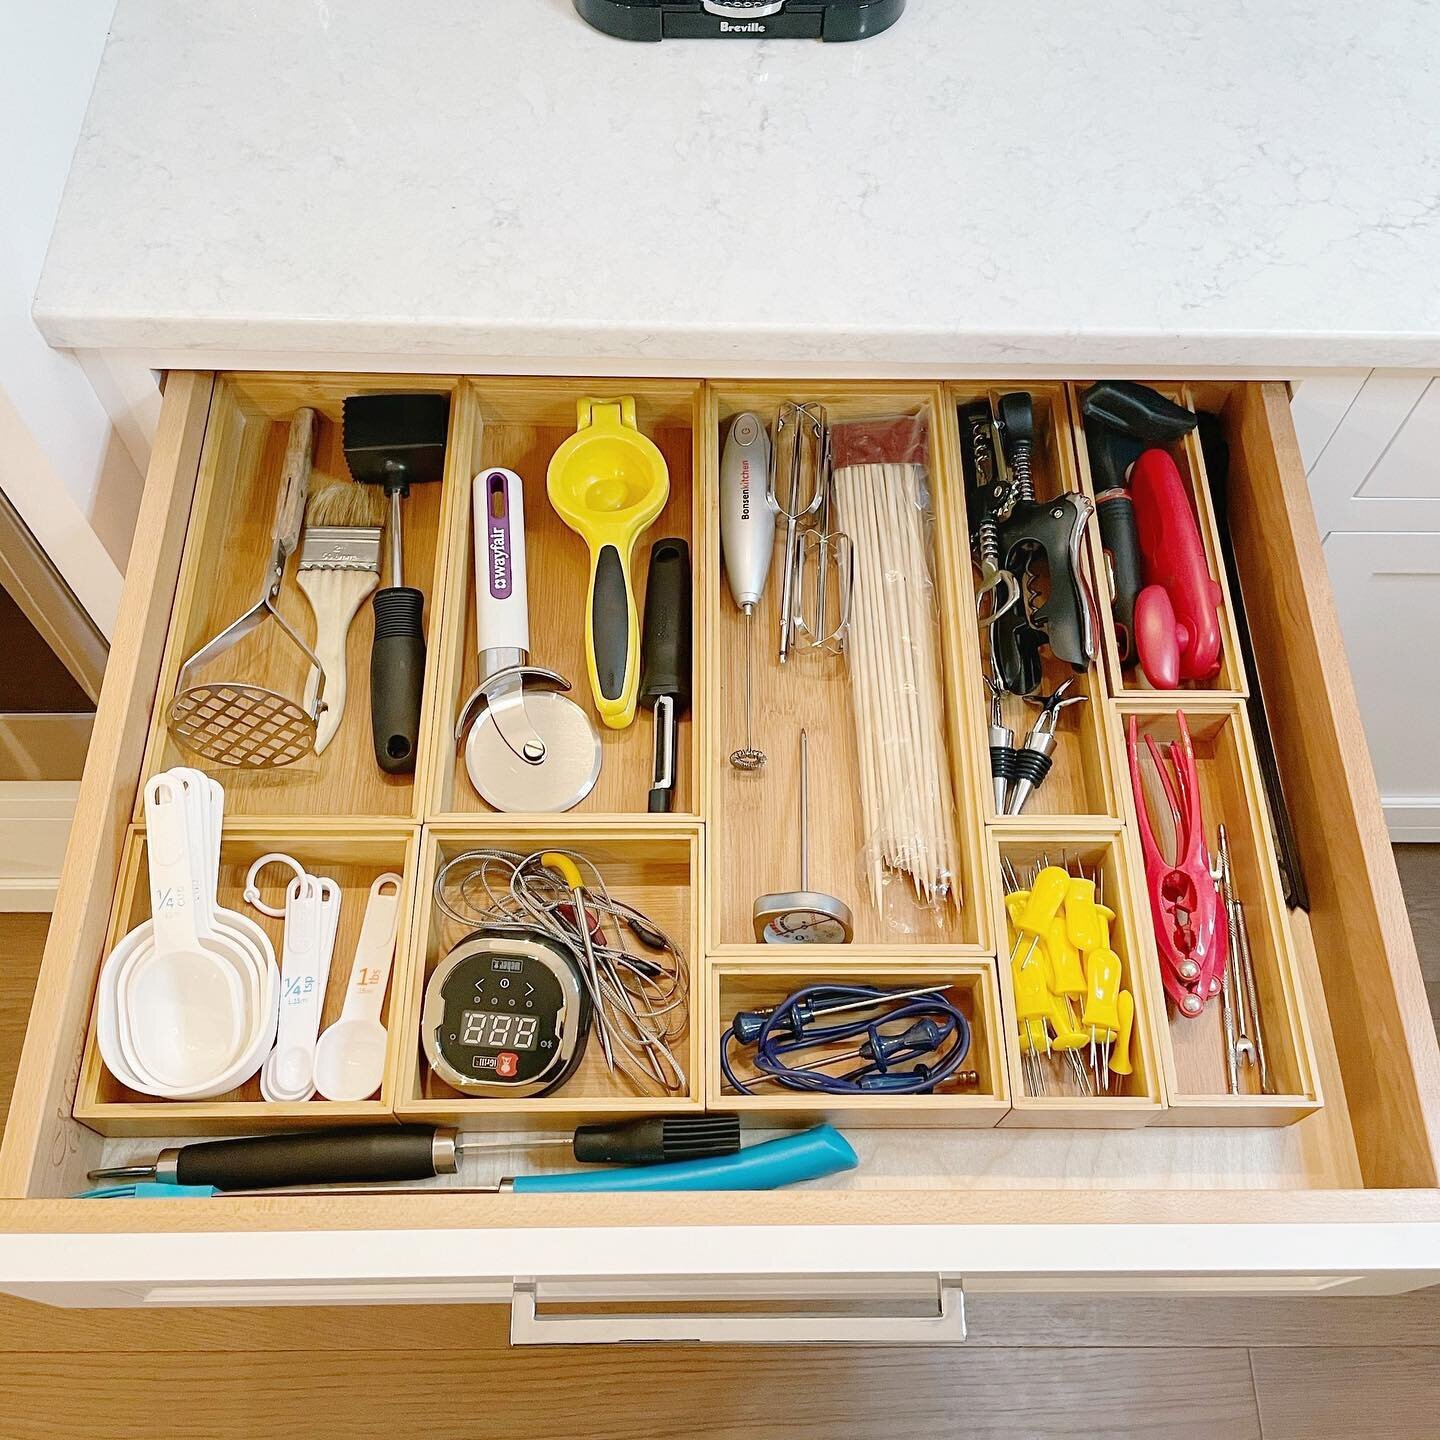 Goodbye disorder✌️

These bamboo drawer organizers from @thecontainerstore are magic✨ We refreshed this kitchen drawer and brought it from overwhelm to pure simplicity. Everything has a place. No more wasting those 15 seconds you don&rsquo;t have sif